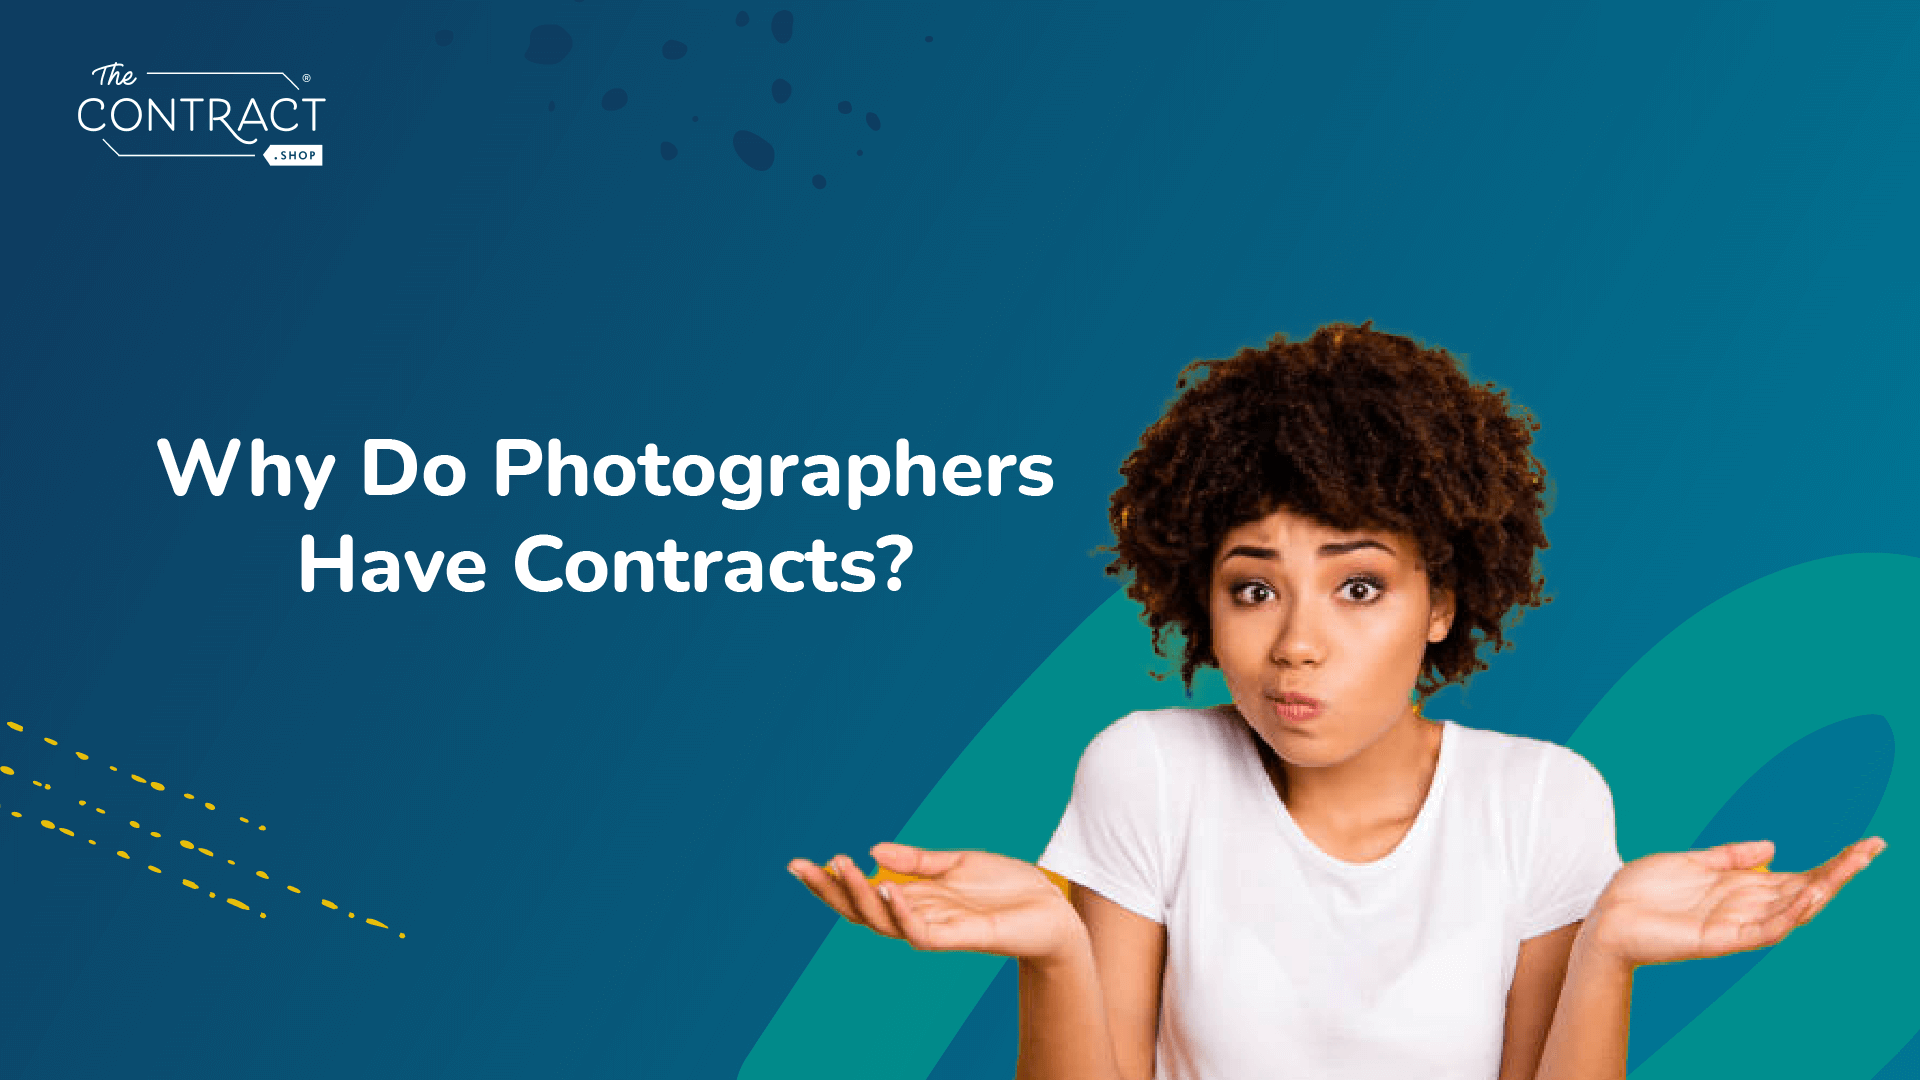 Why Do Photographers Have Contracts?